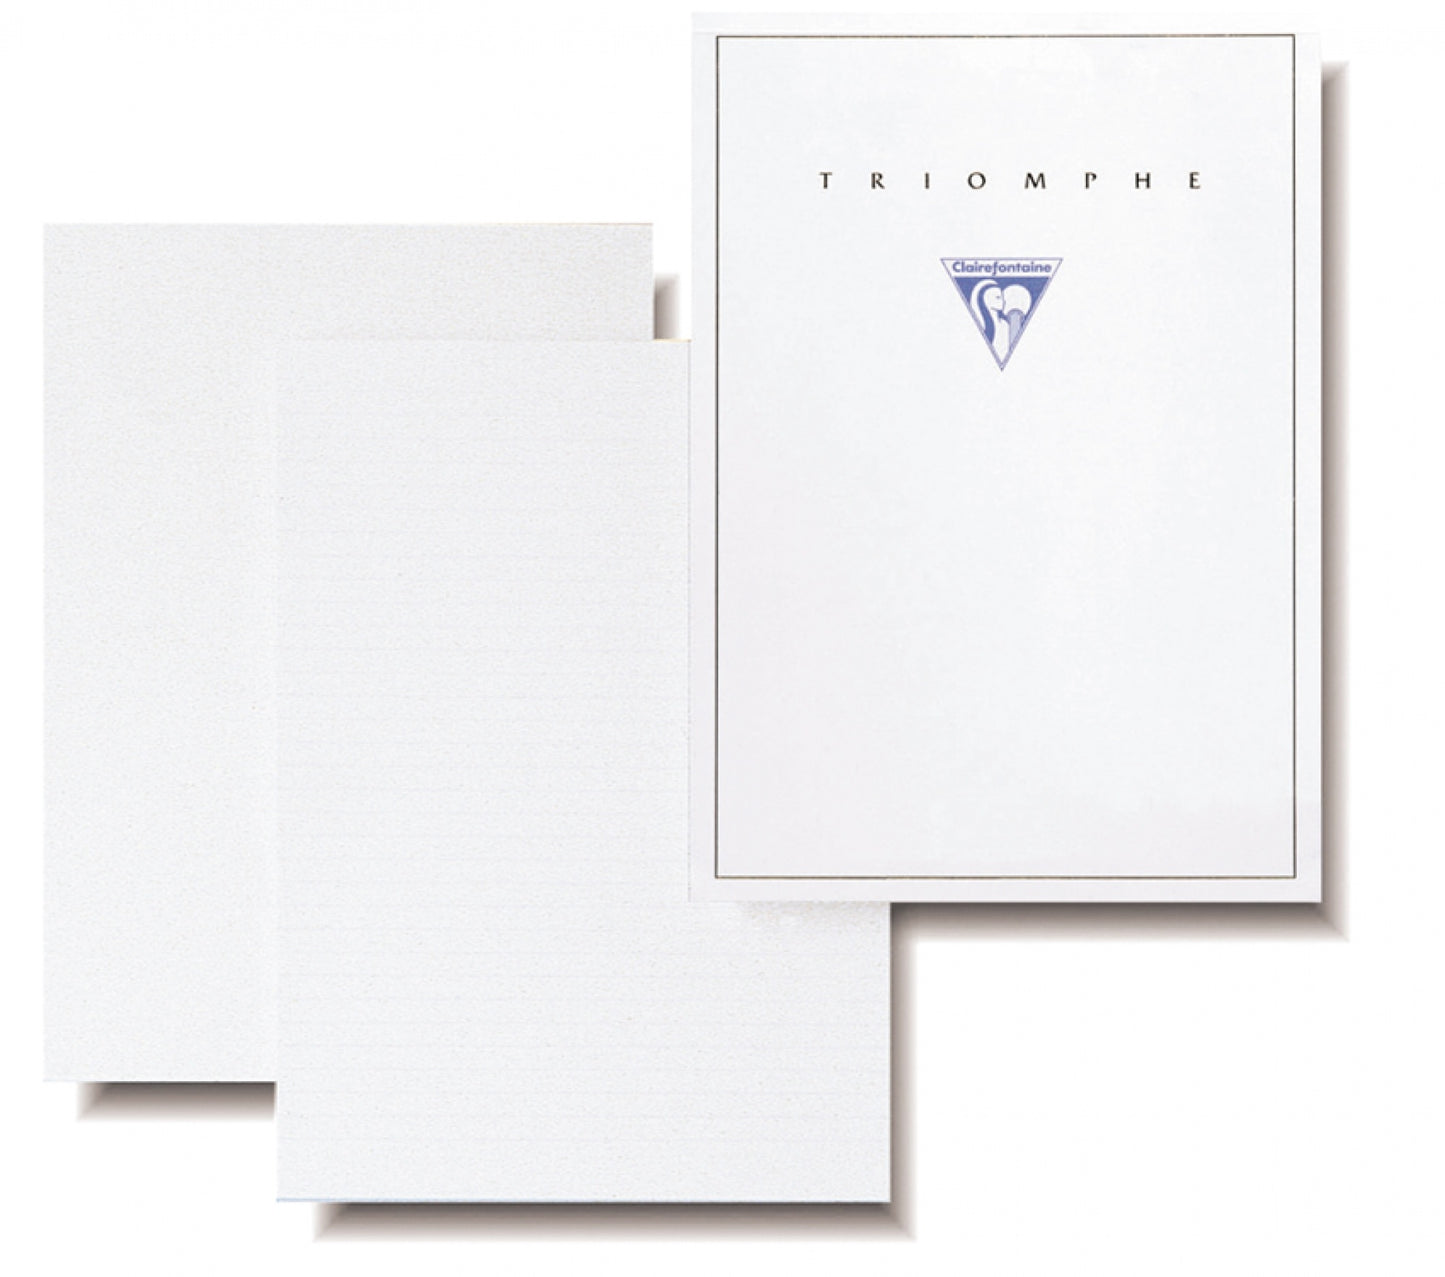 Clairefontaine Triomphe Small A5 Stationery Tablet (50 Sheets) - Lined